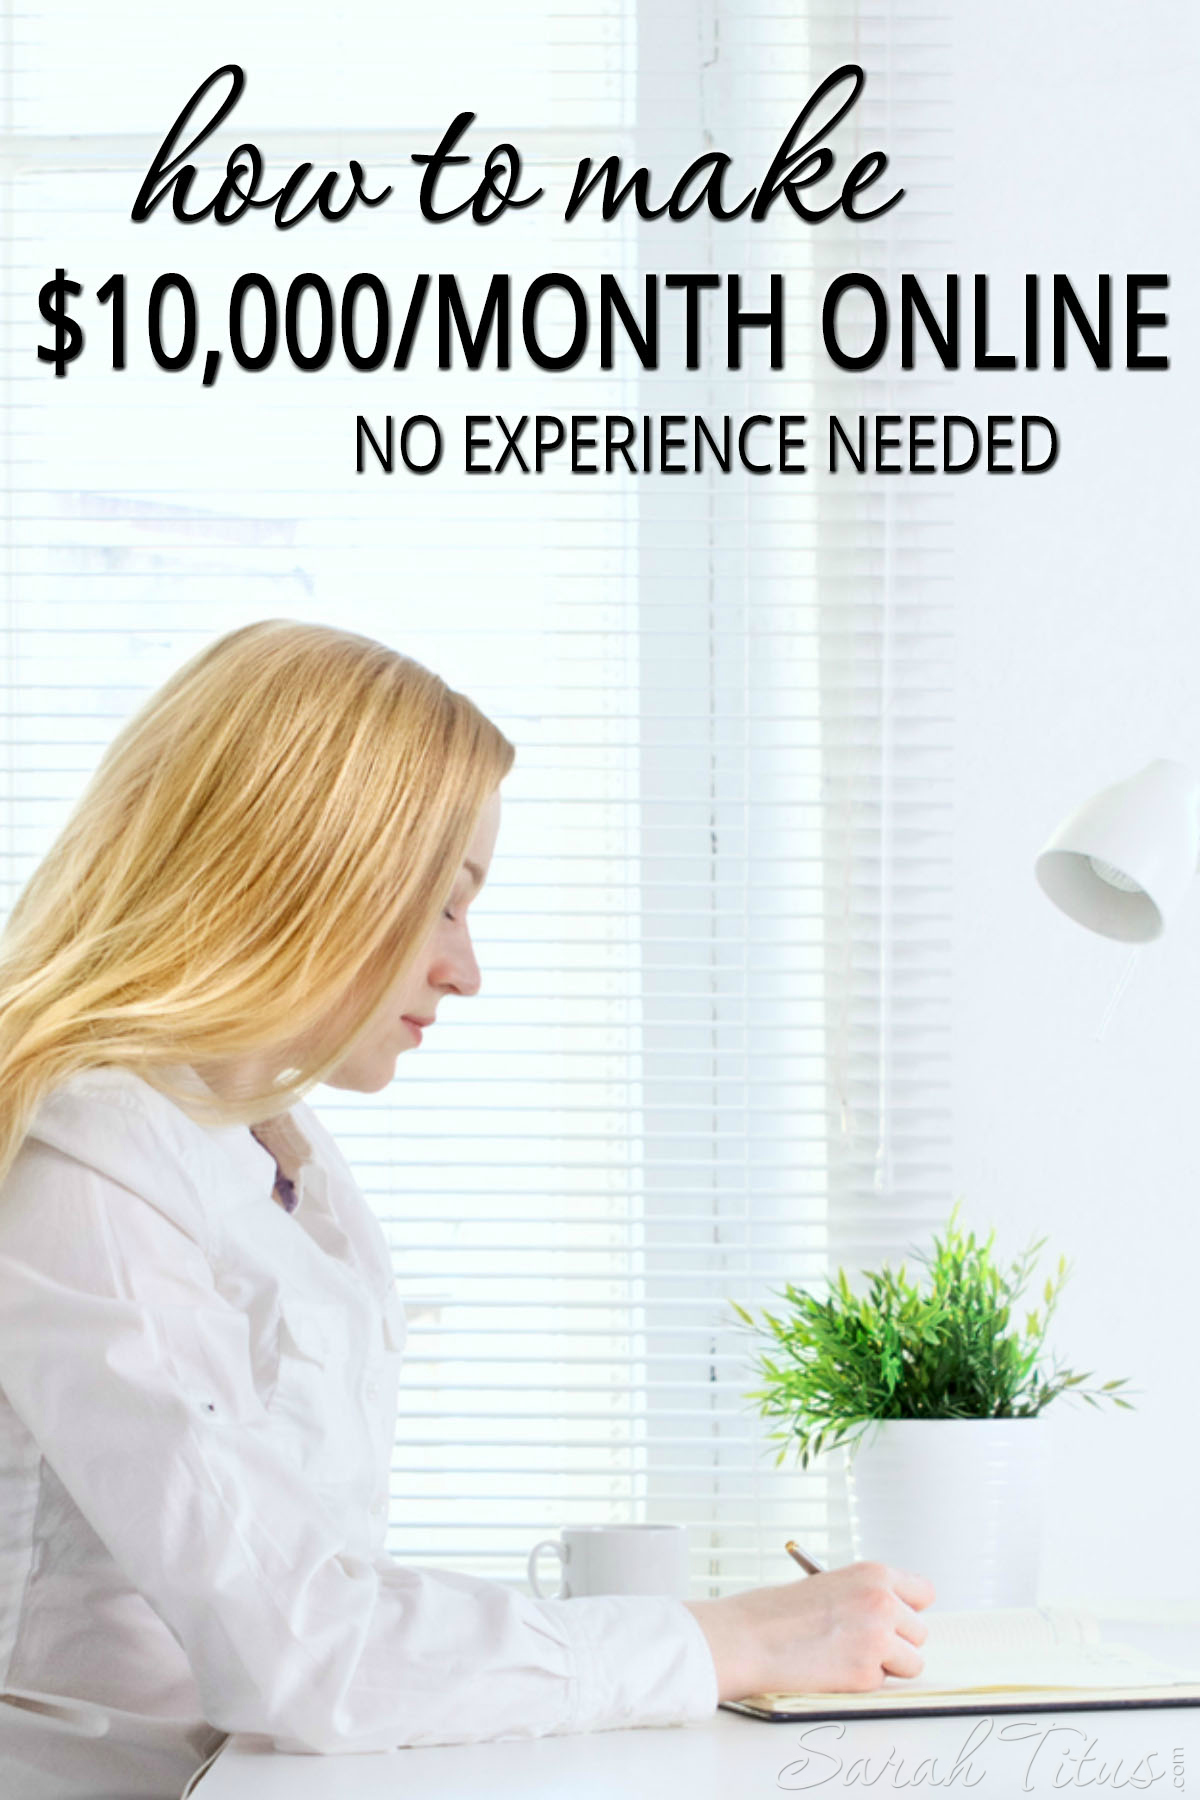 I'm a mom who's been making money online for more than 17 years. This is, by far, my favorite way to make money from home and you don't even need any previous experience. I didn't have any when I started either. One year later, I was making $10,000/month!